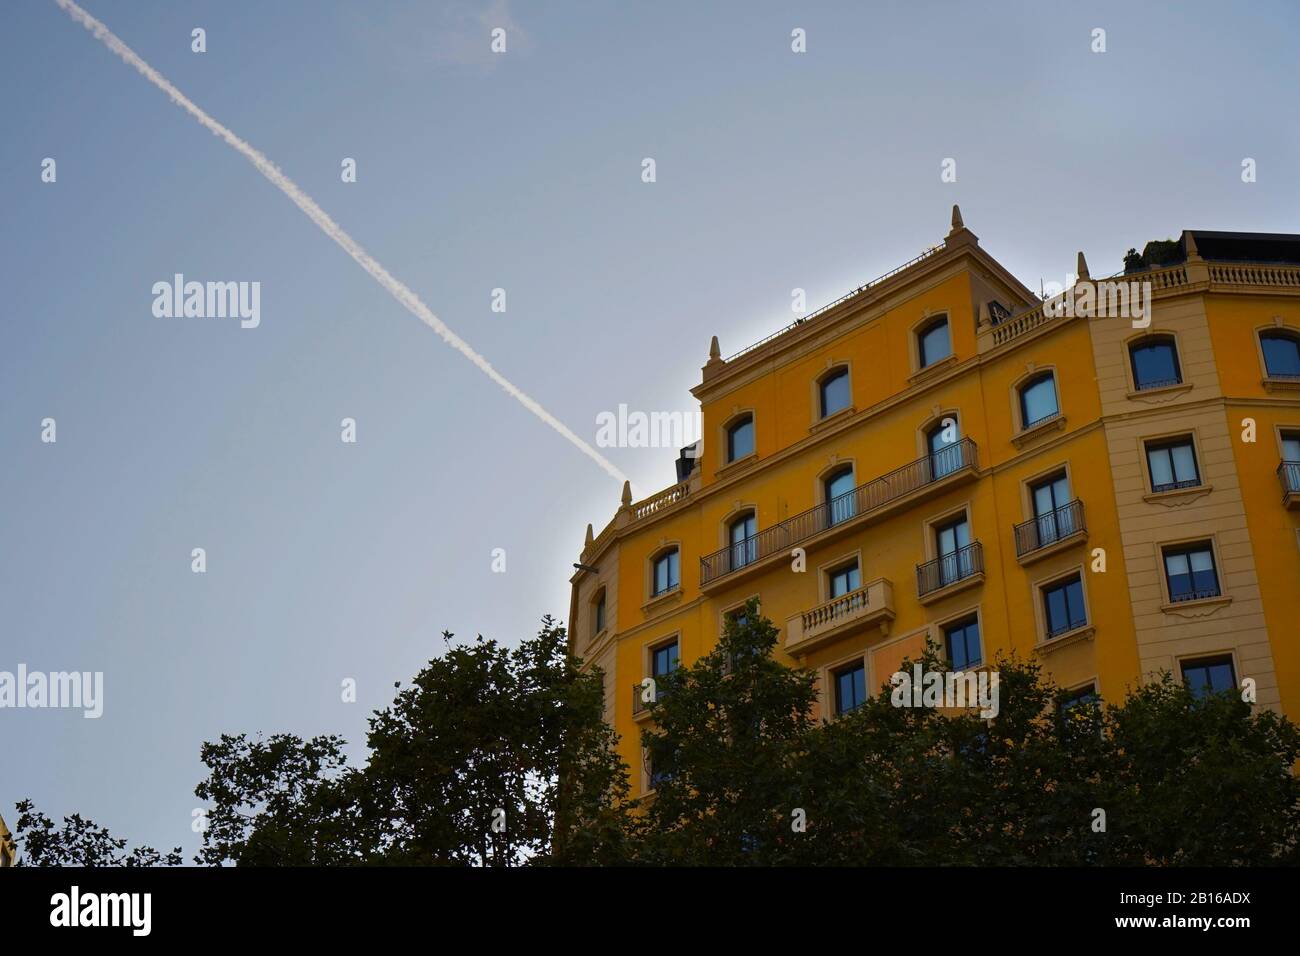 A bright yellow decorative apartment building surrounded by blue sky and a diagonal plane trail Stock Photo